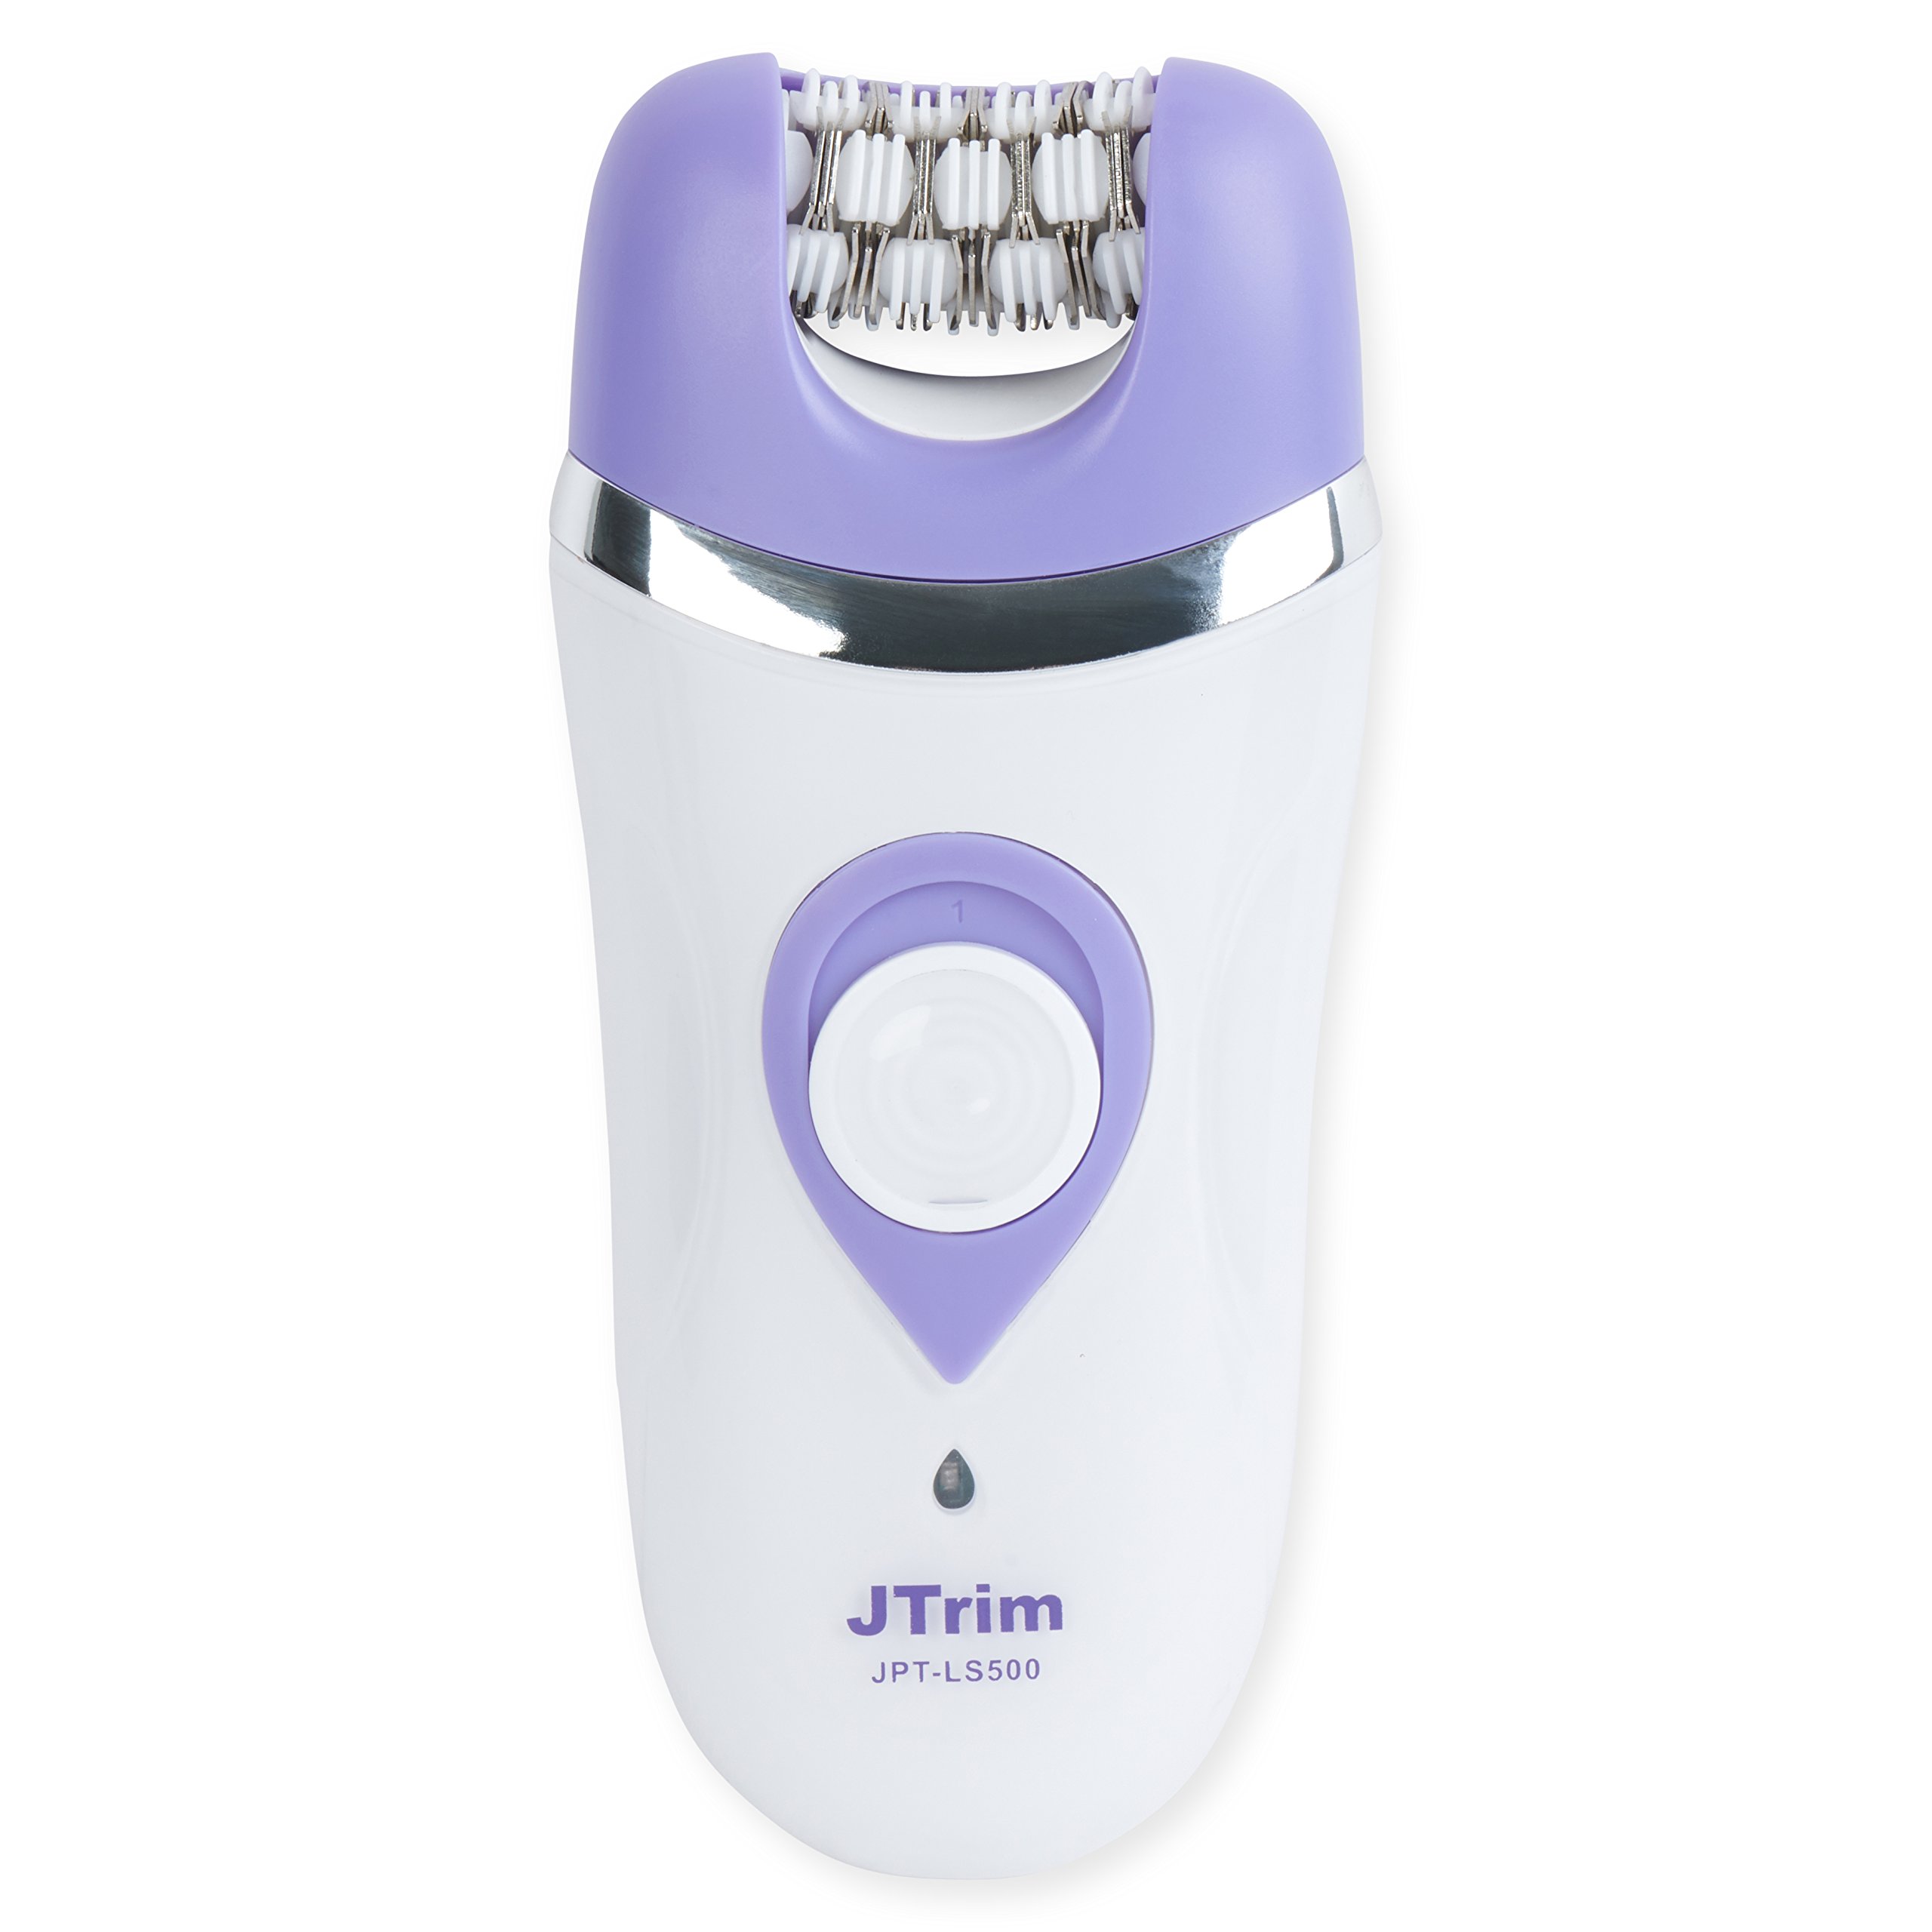 Epilator For Women By JTrim SilkTouch 3 in 1 Electric Shaver With Facial Cleansing Brush JPT-LS500